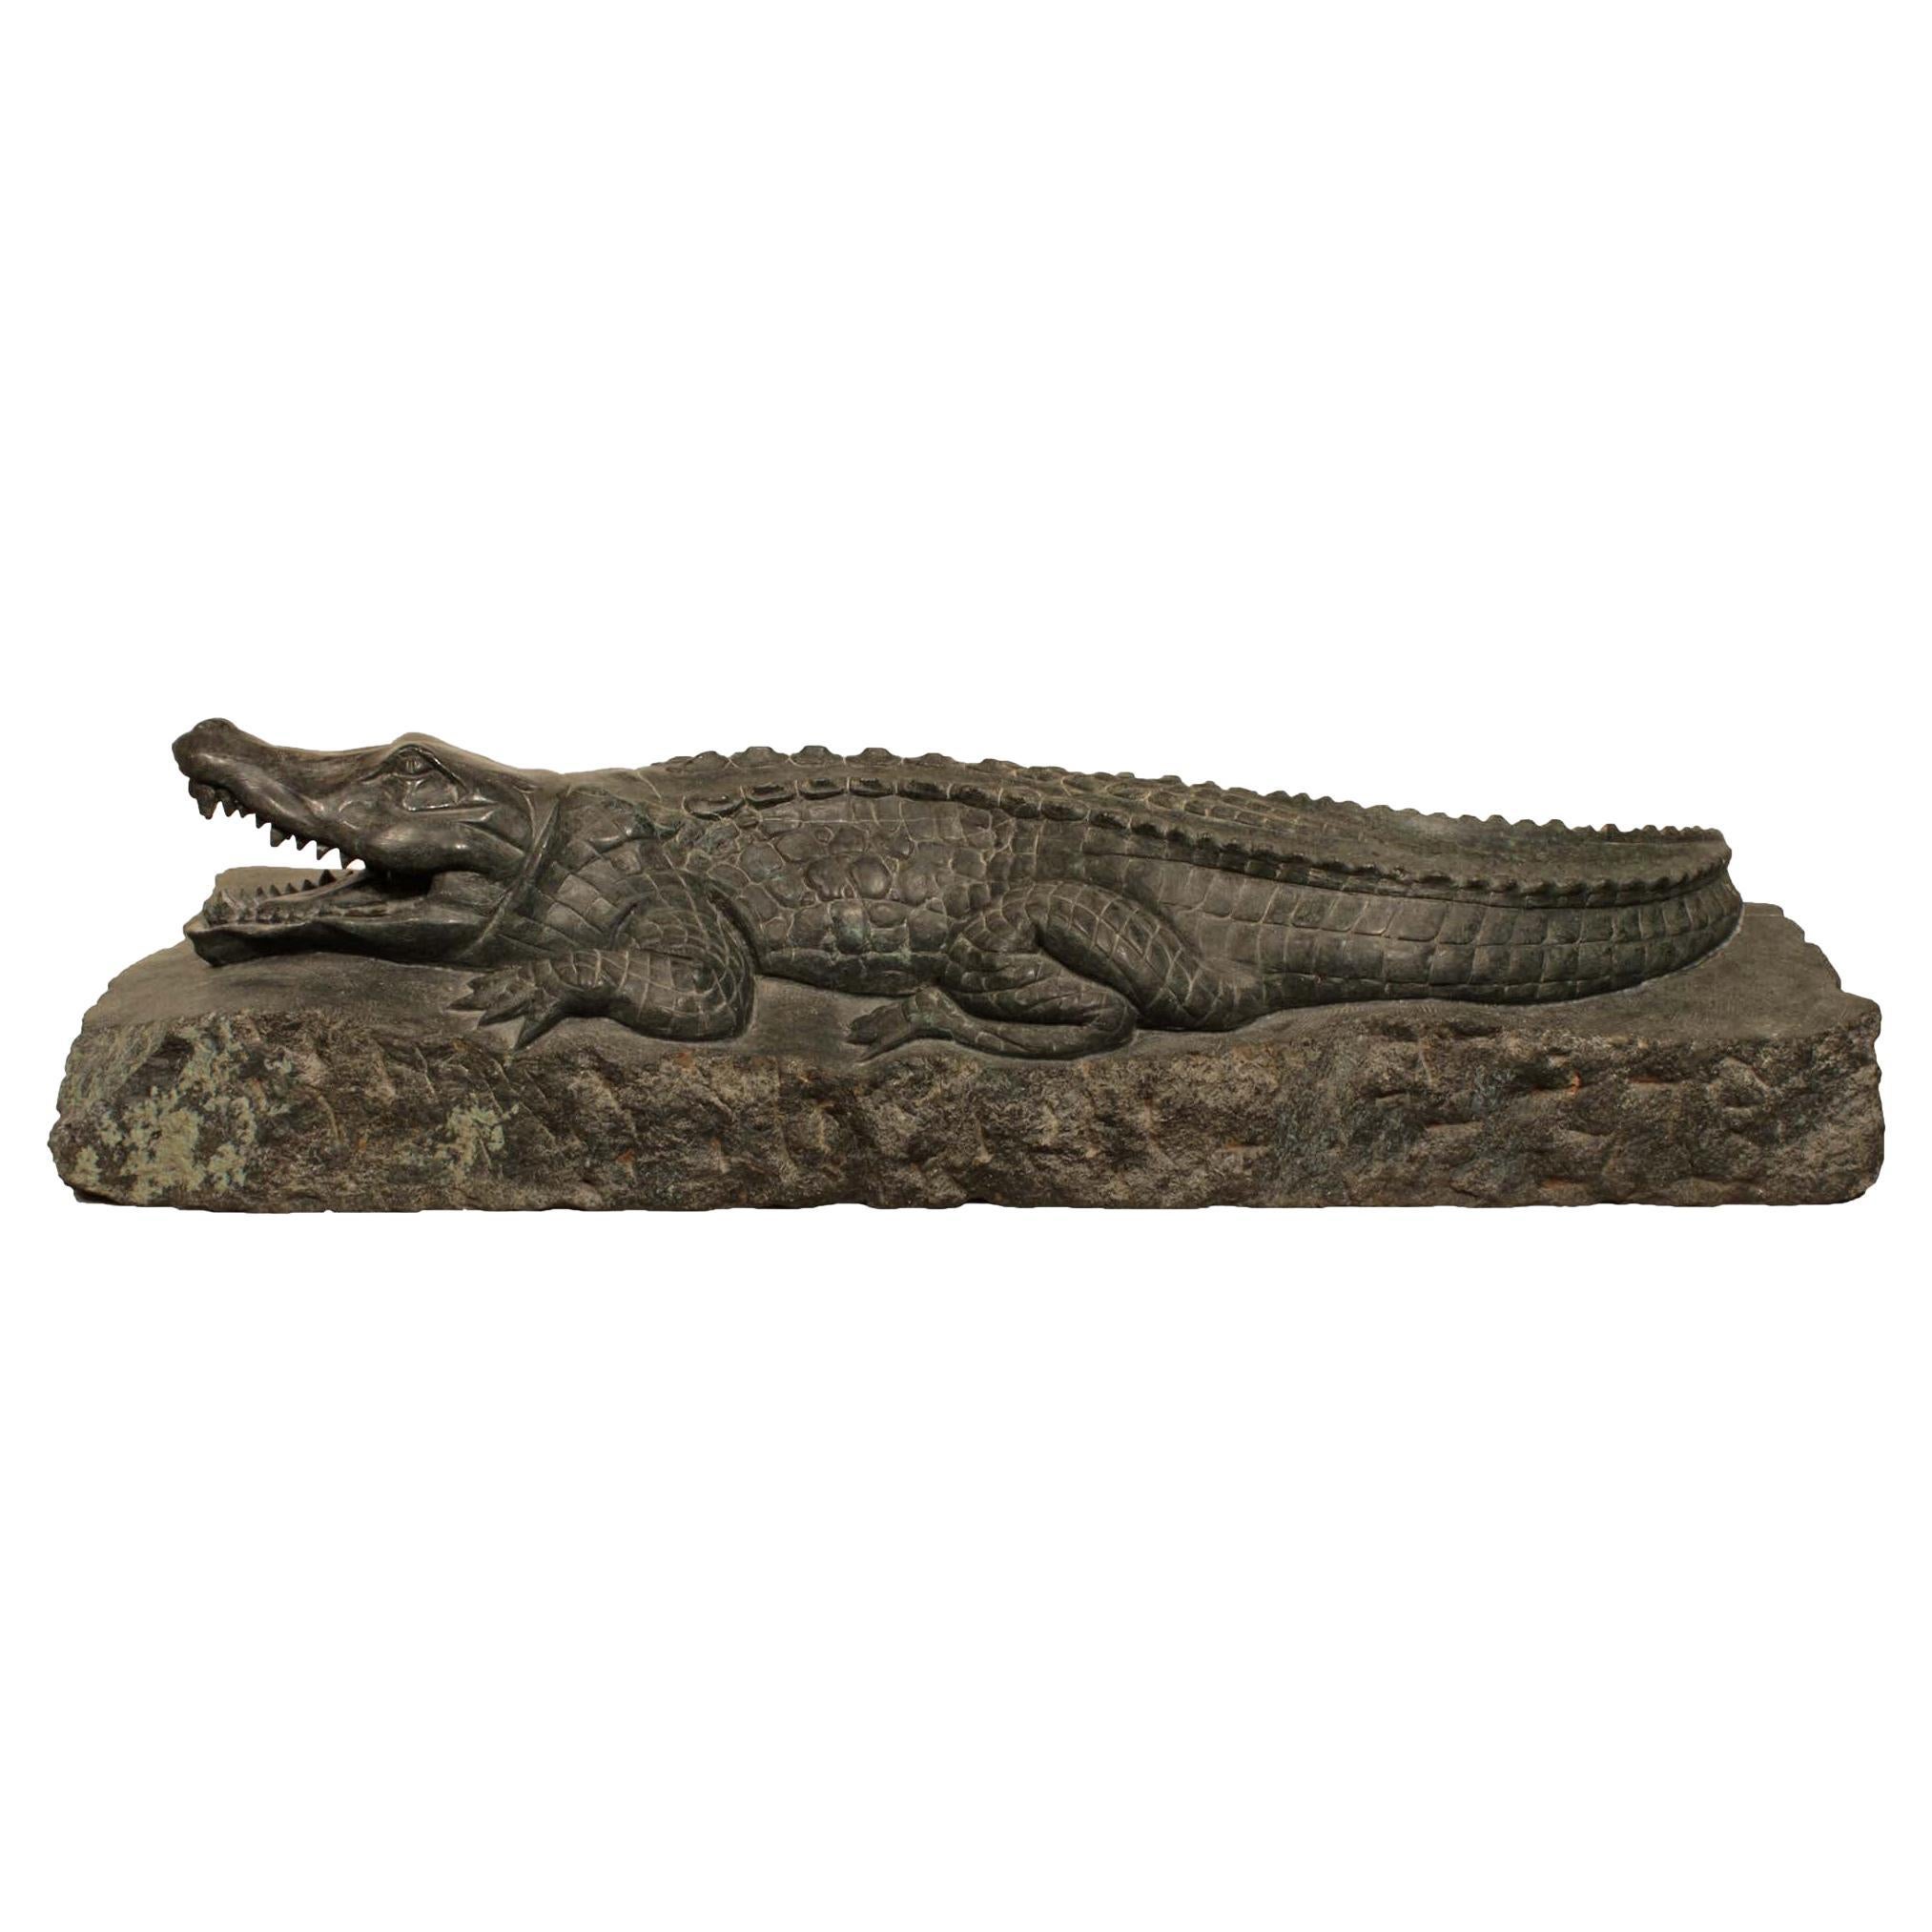 Italian 19th Century Verde Prato Marble Alligator Sculpture, from Florence For Sale